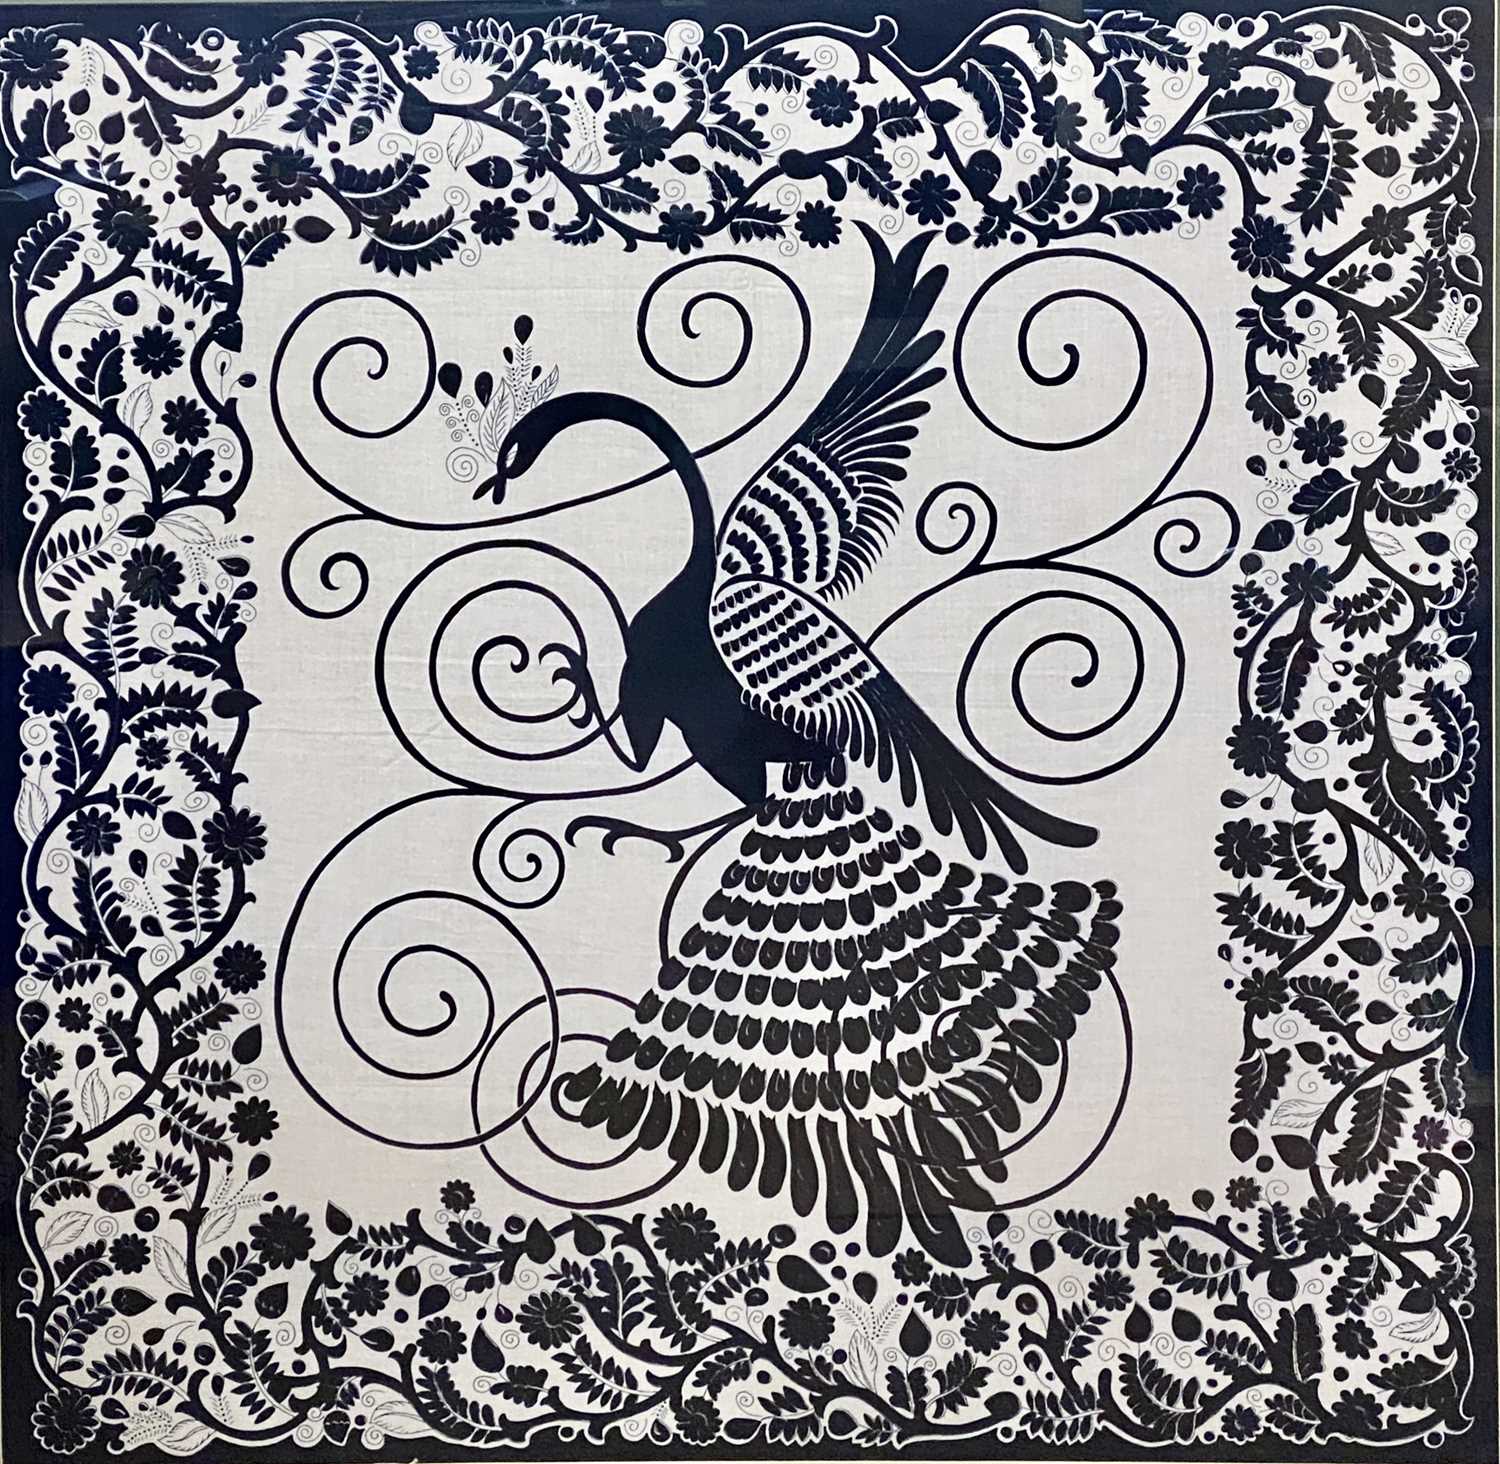 CHINESE SCREEN PRINT - in black and white depicting a peacock within a floral border, 81 x 82cms